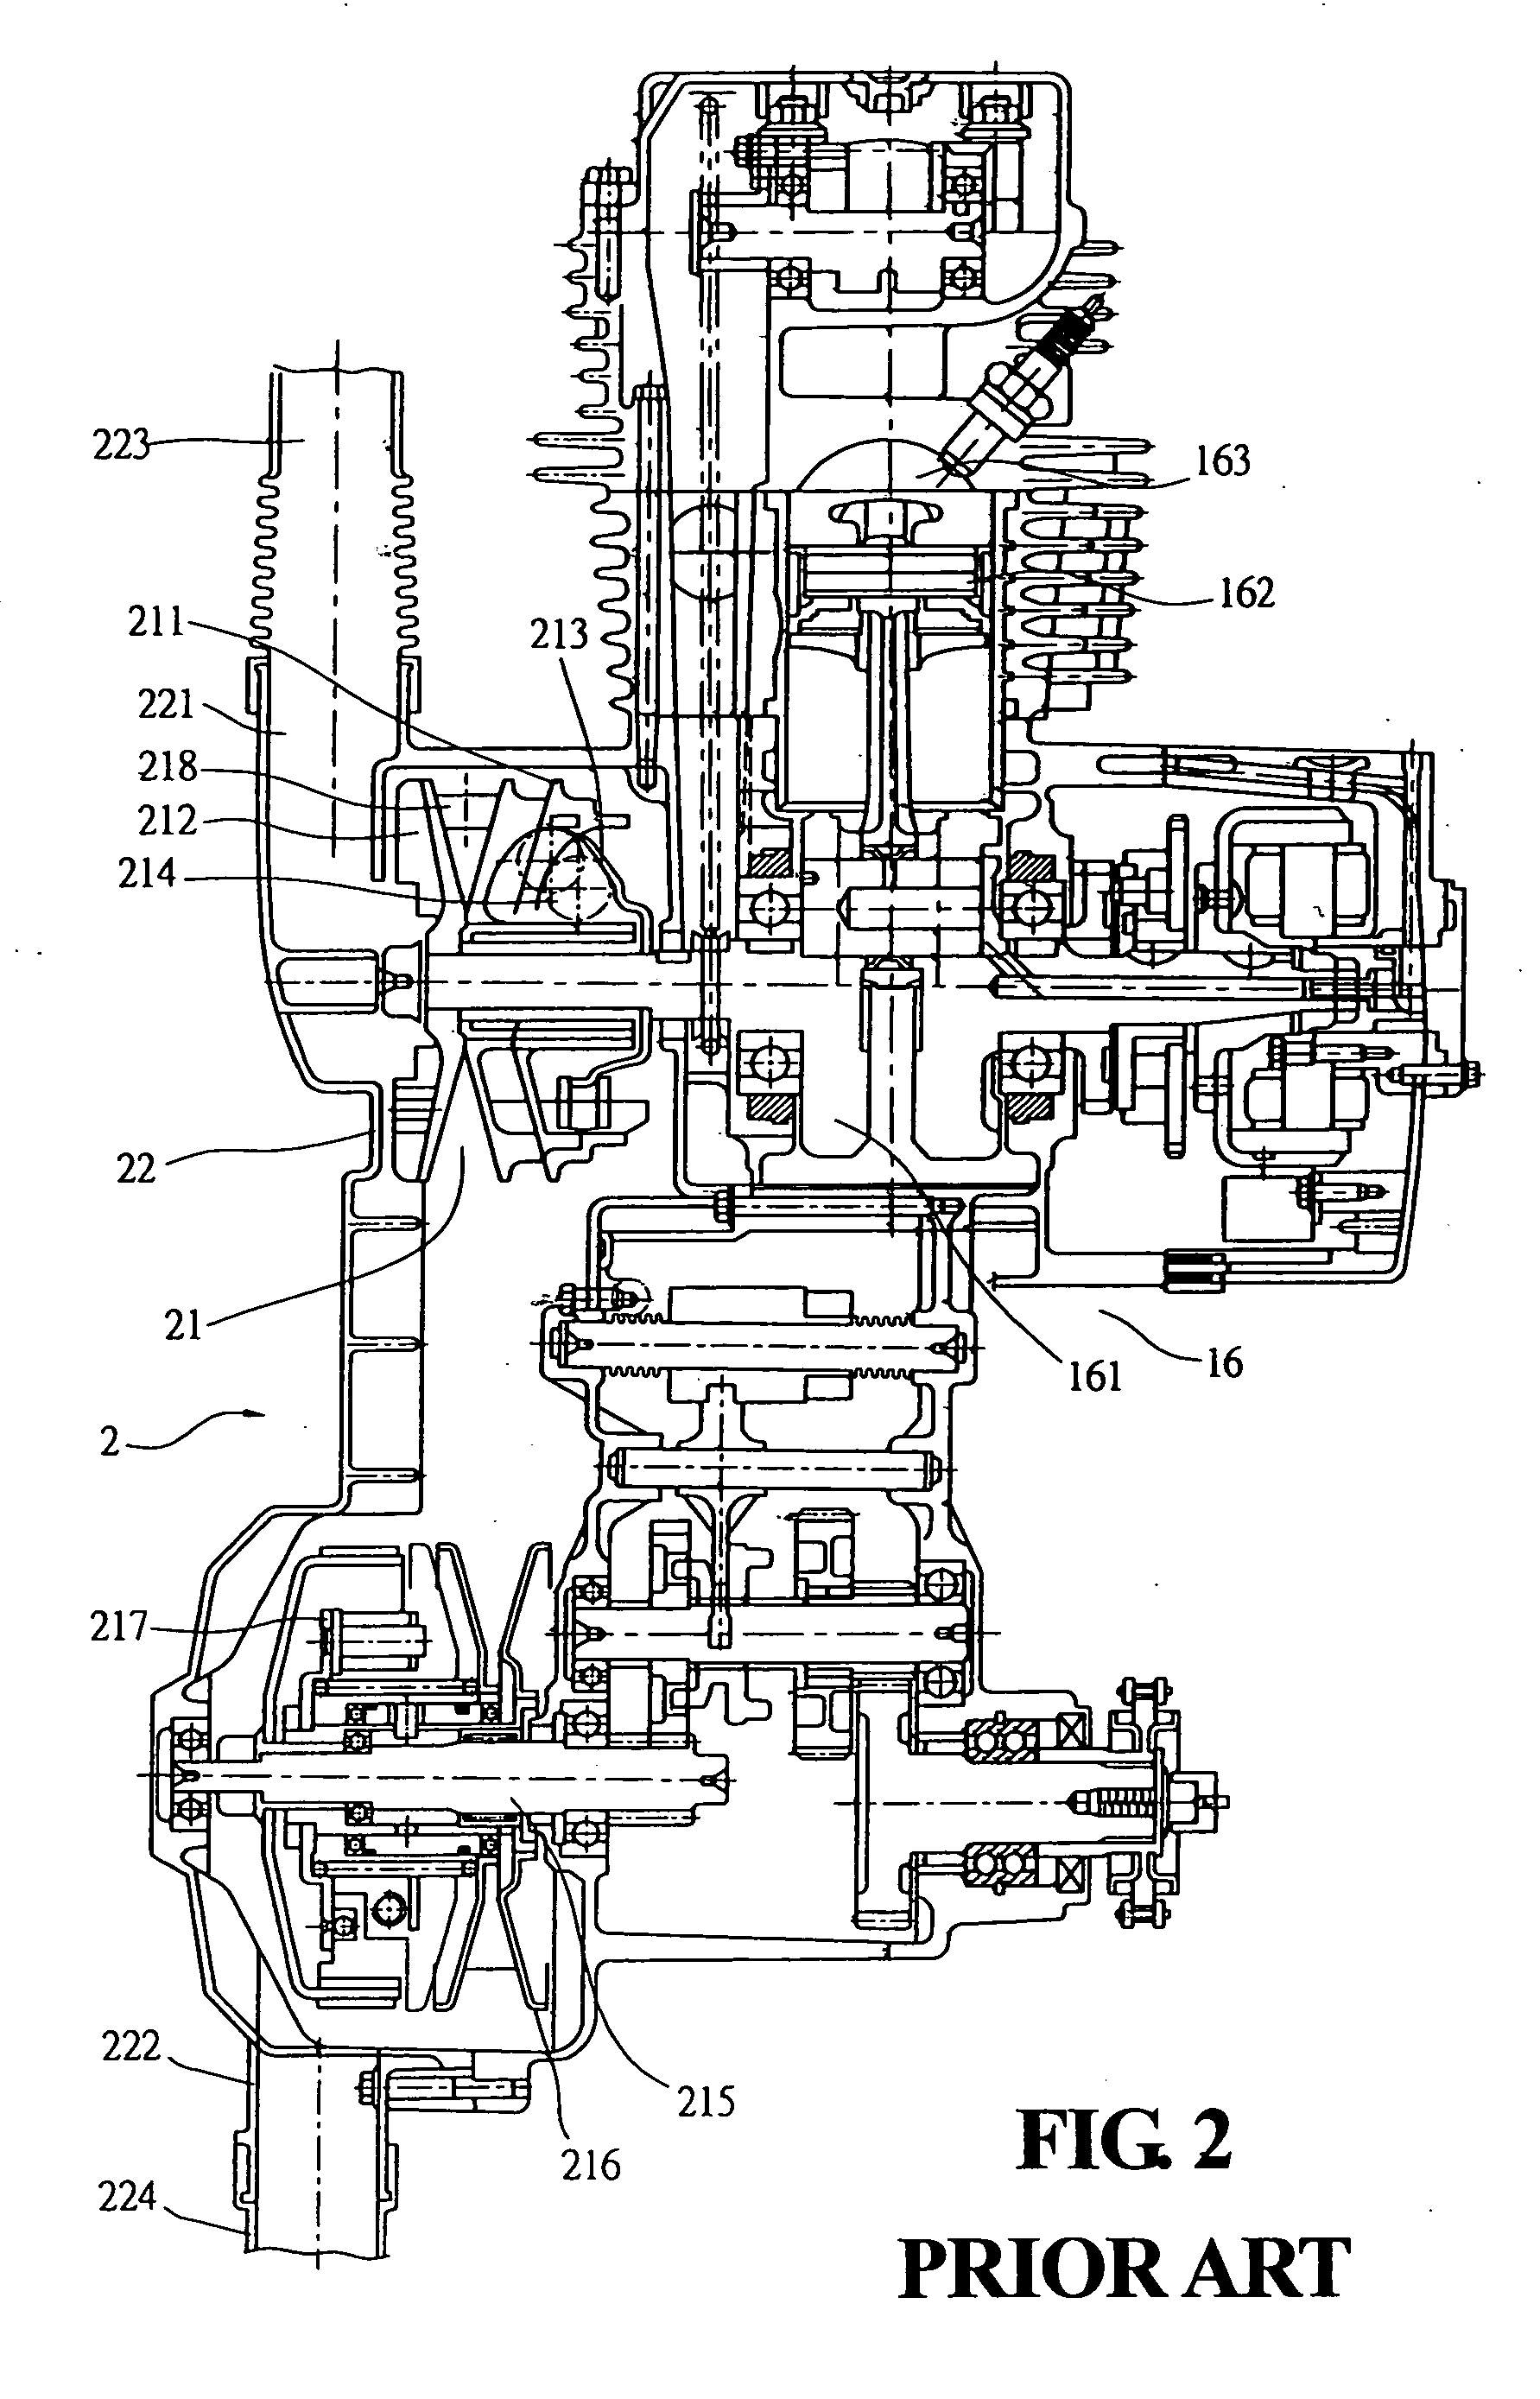 Cooling structure for a continuous variation transmission system of an all-terrain vehicle